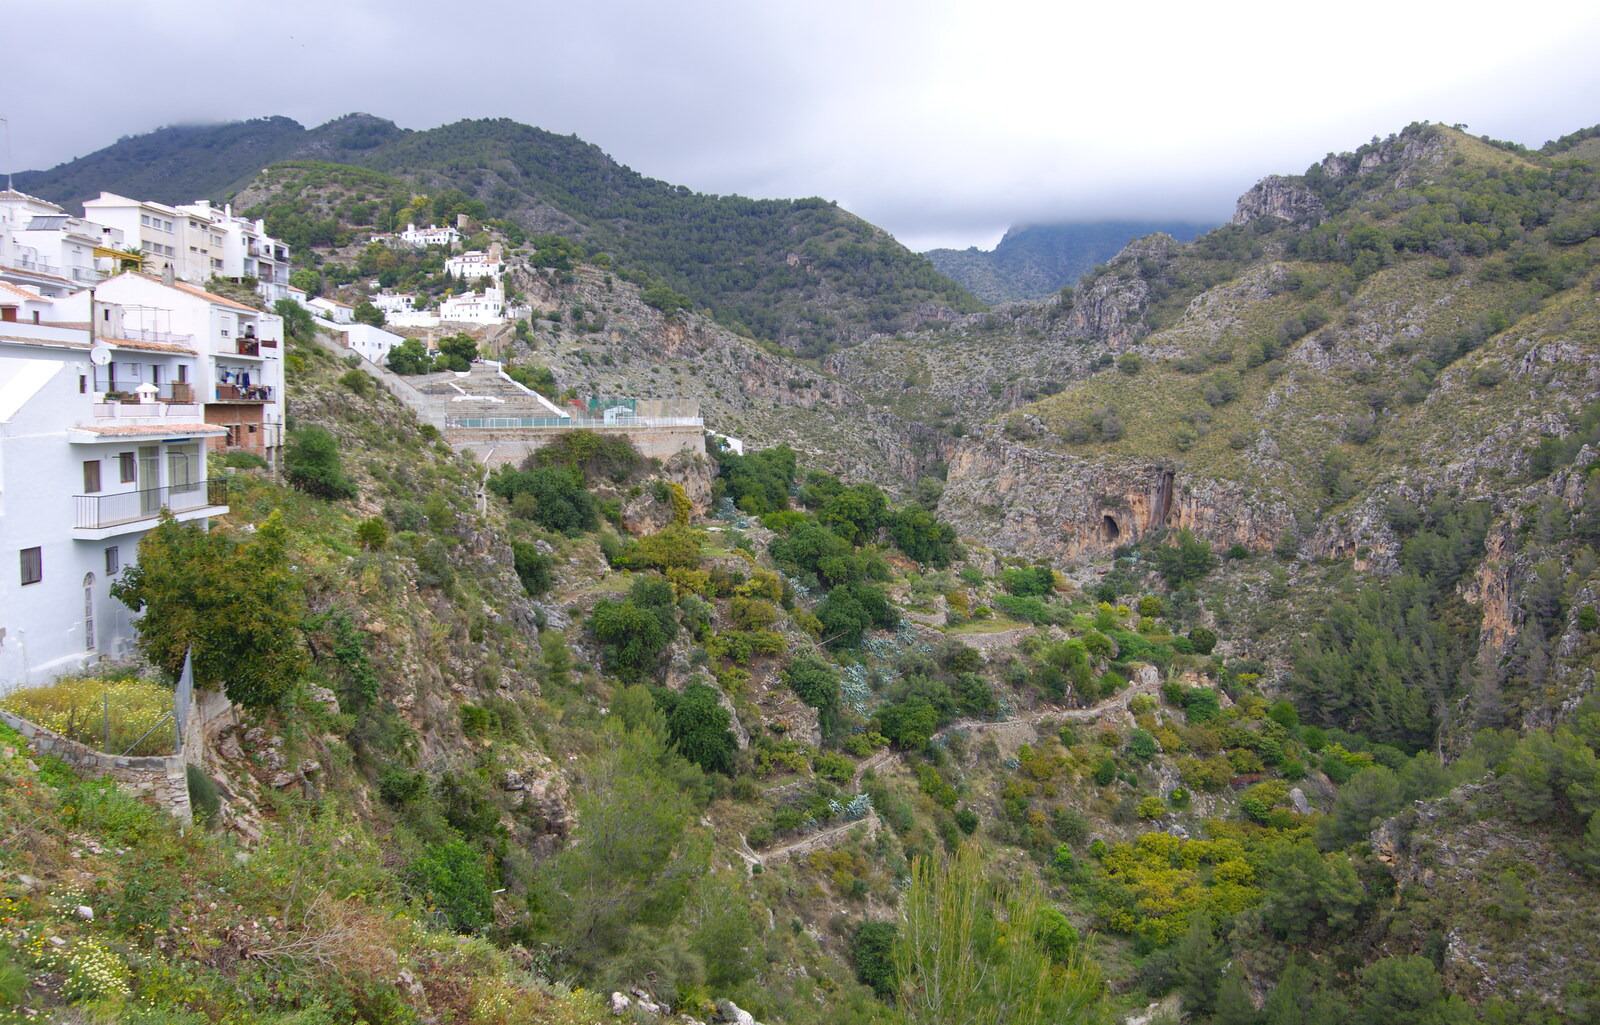 The train stops by this impressive gorge from The Caves of Nerja, and Frigiliana, Andalusia, Spain - 18th April 2019